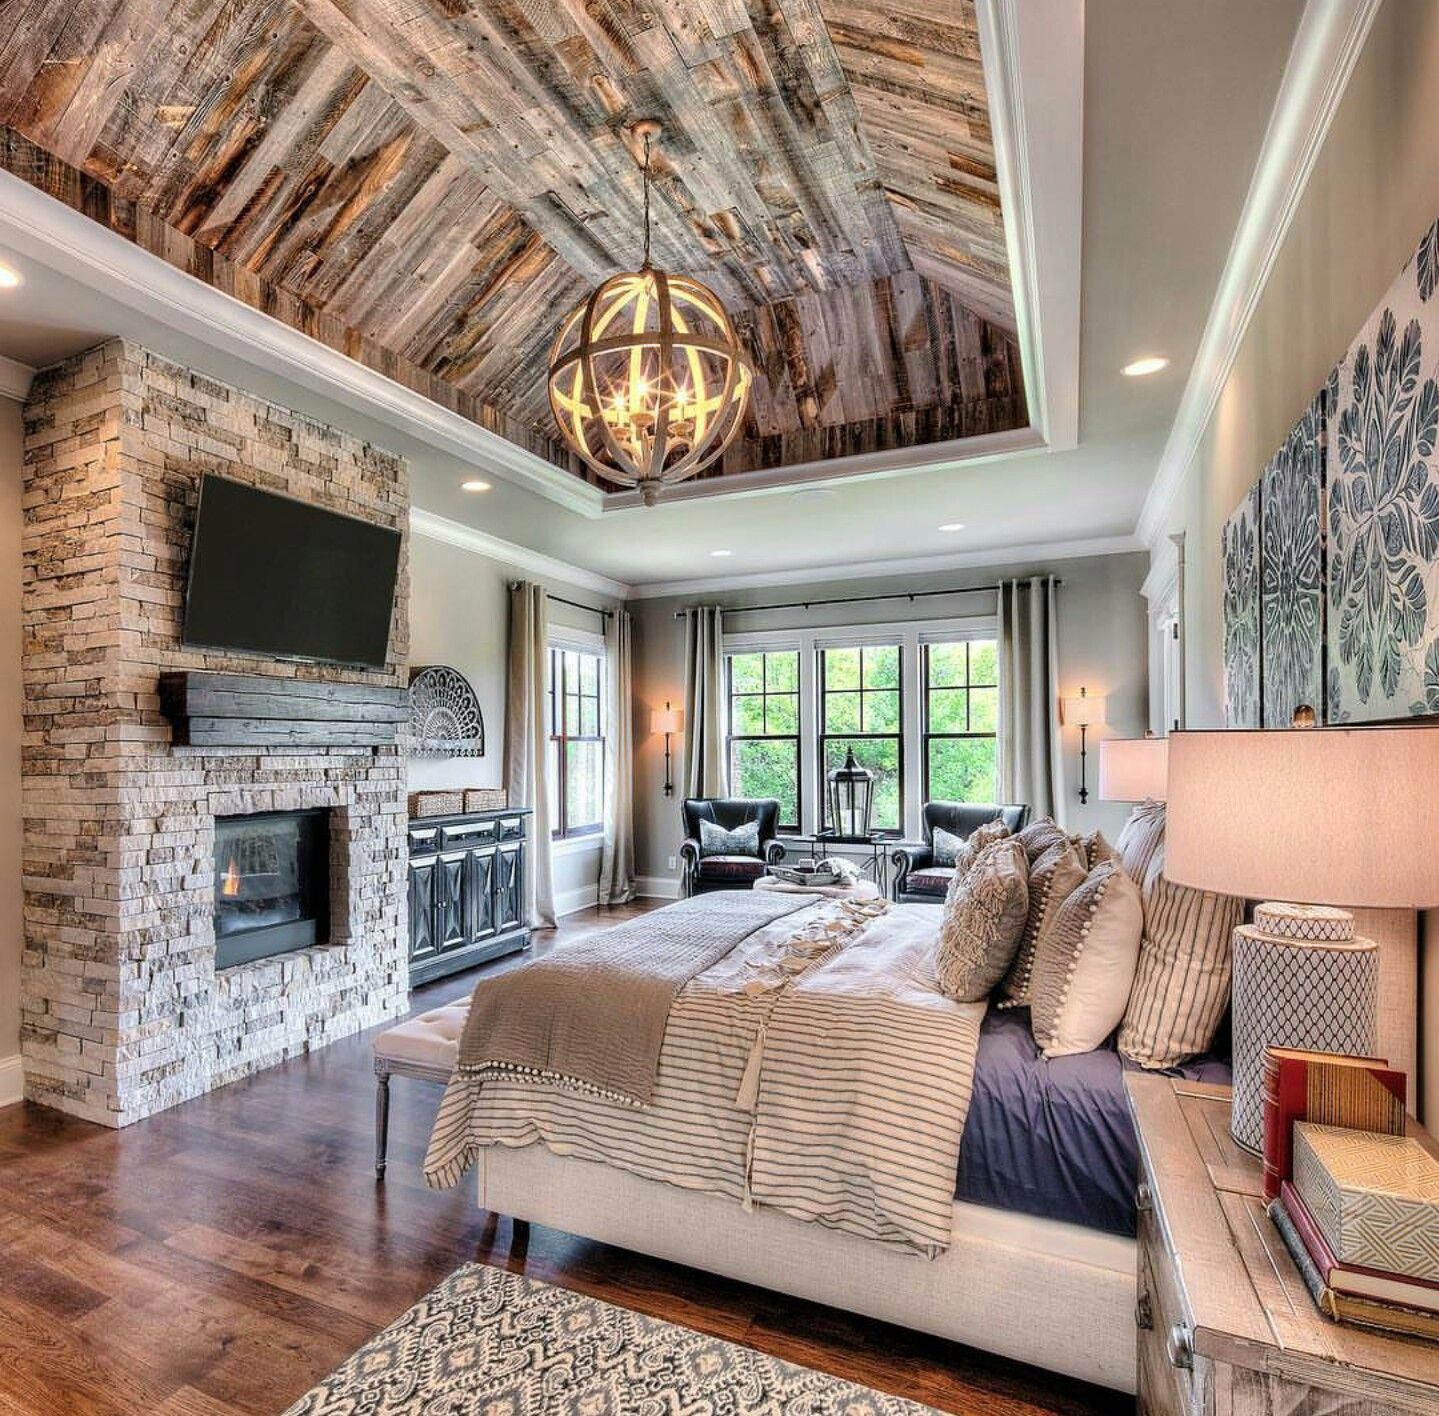 Central Arkansas Fireplace Awesome Great Mix Of Rustic and Luxury In This Starr Homes Master